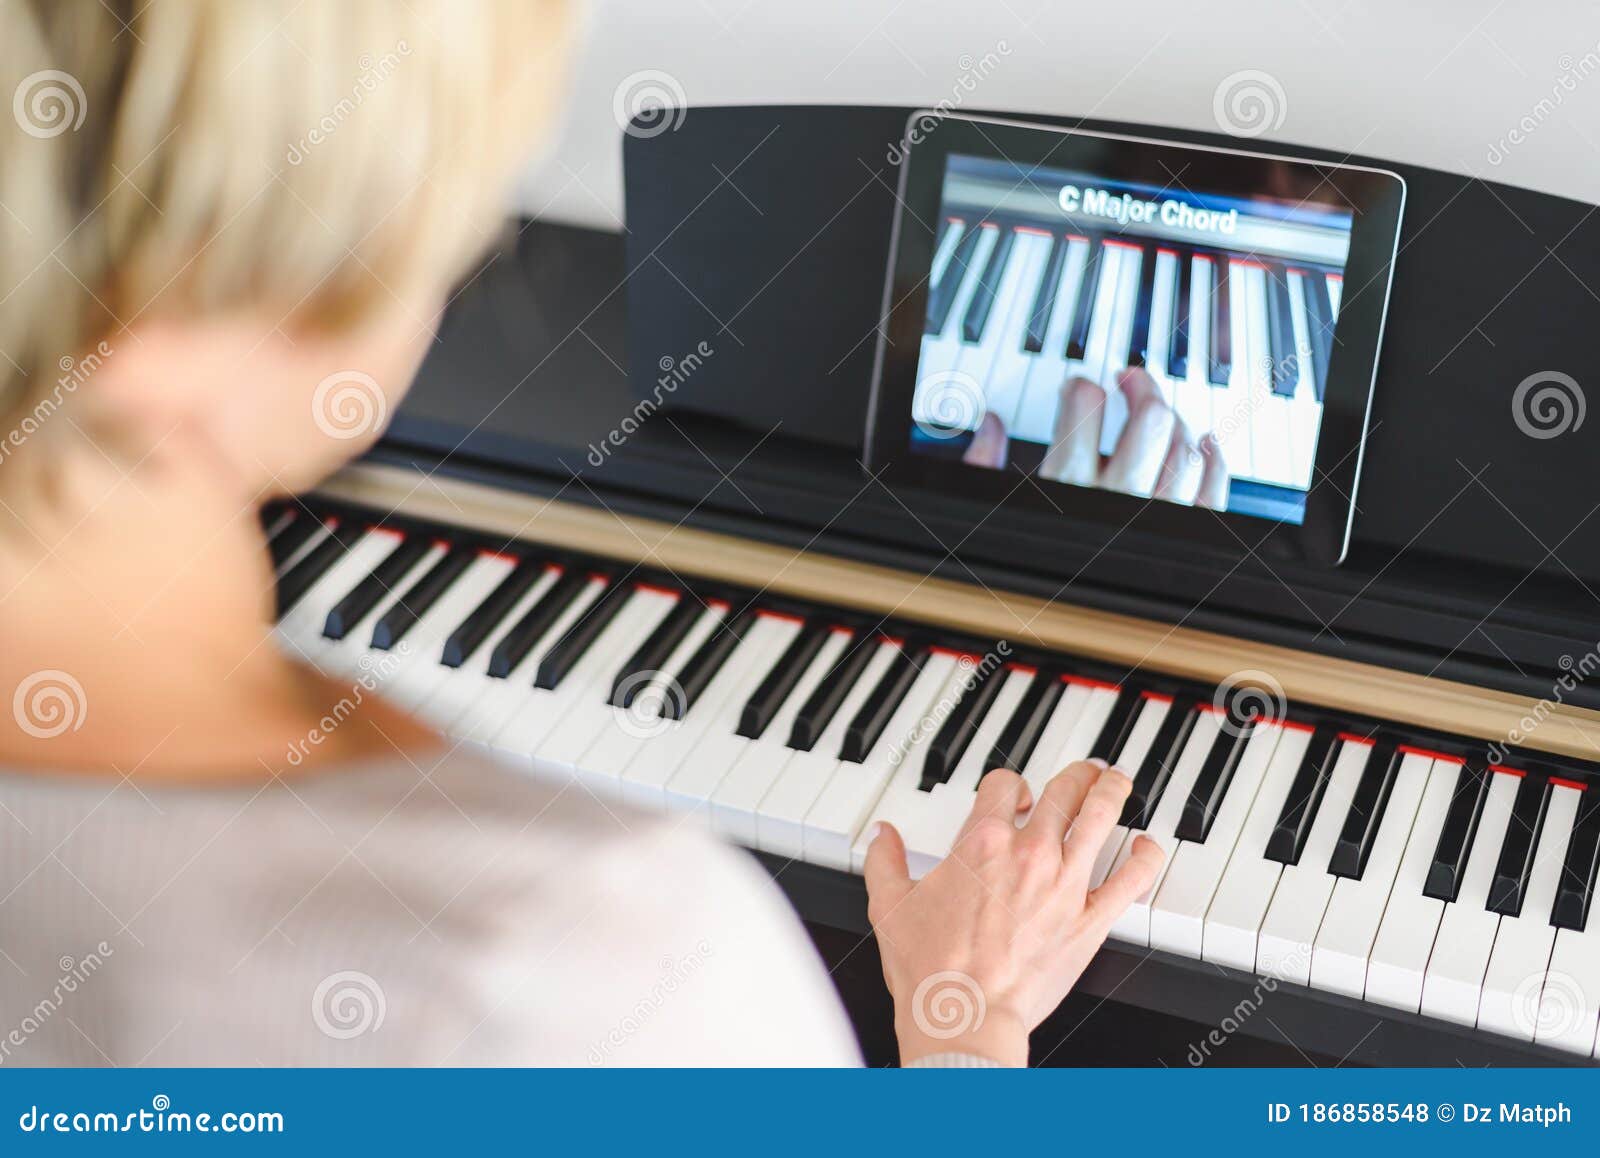 caucasian woman learning to play piano with video lessons.